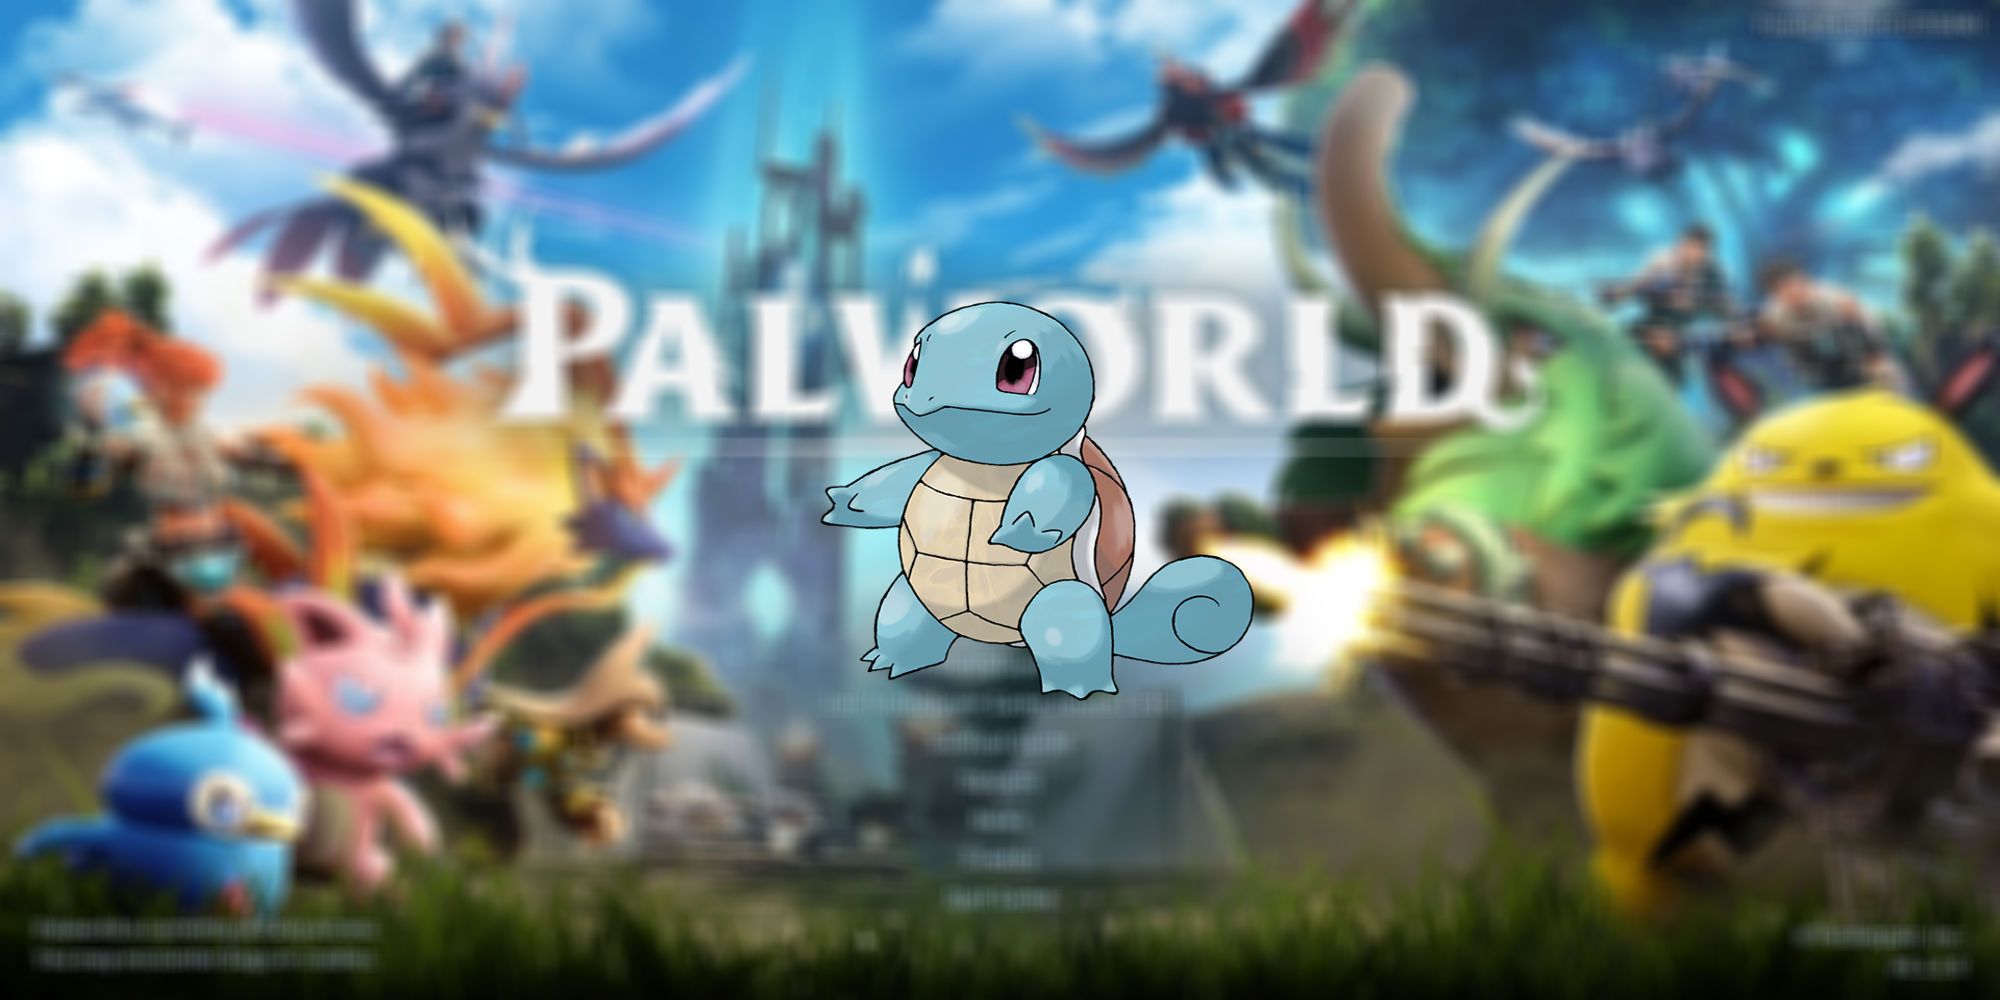 Squirtle from Pokemon potentially fitting in Palworld